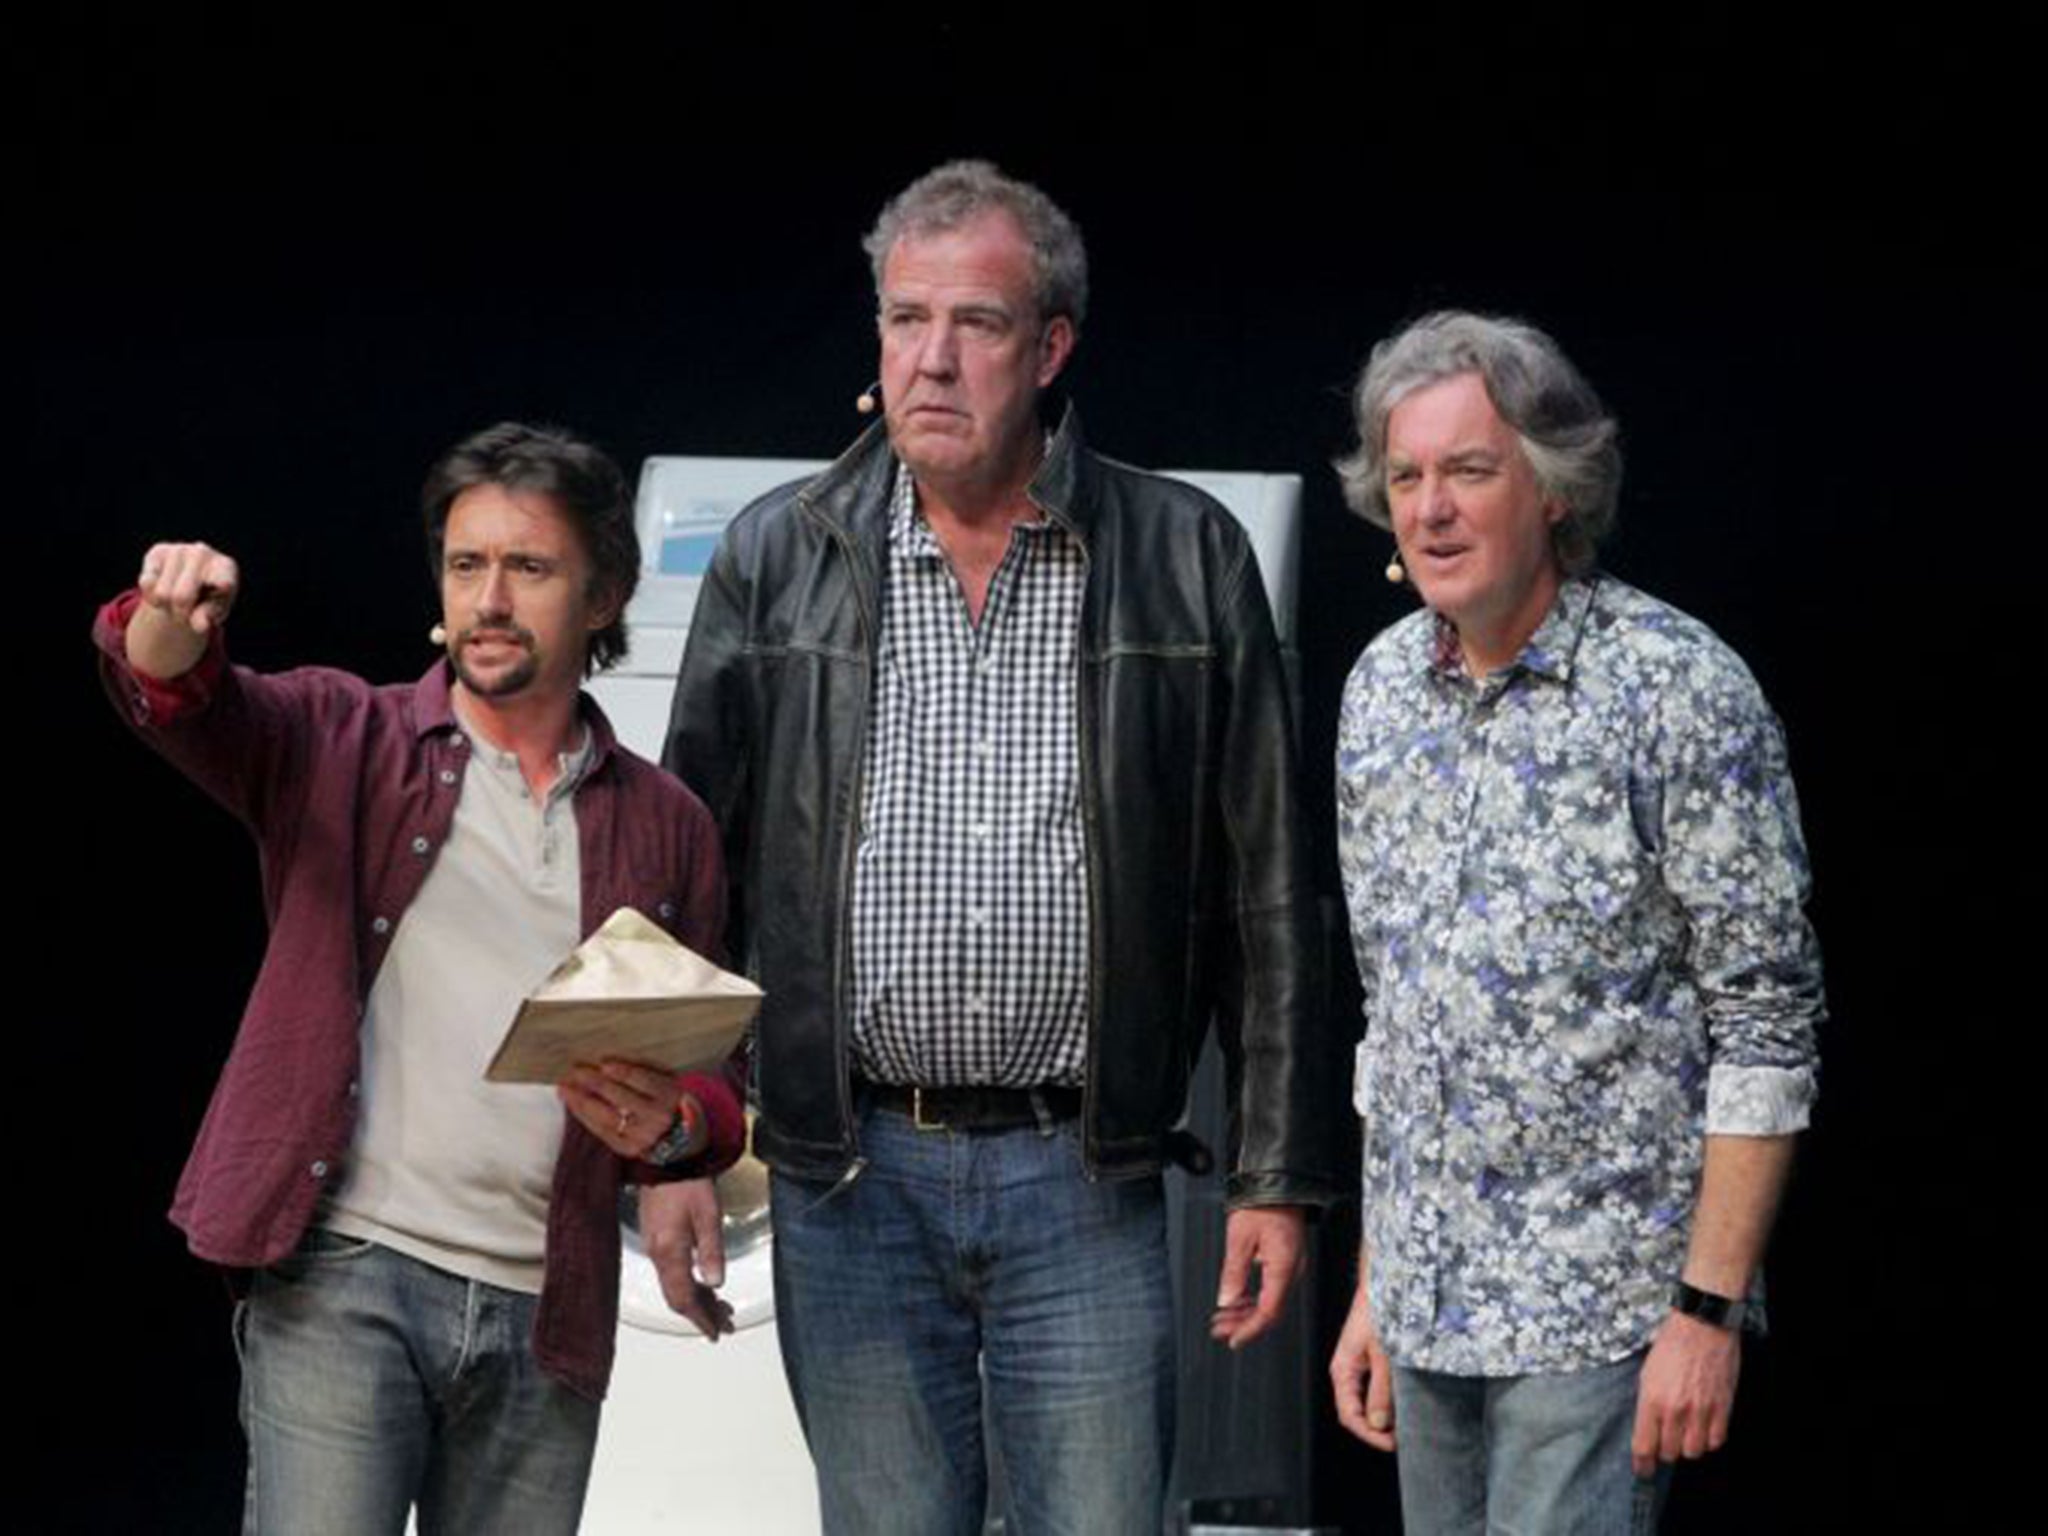 Richard Hammond, Jeremy Clarkson and James May have been teasing Chris Evans after his recent Top Gear revelation